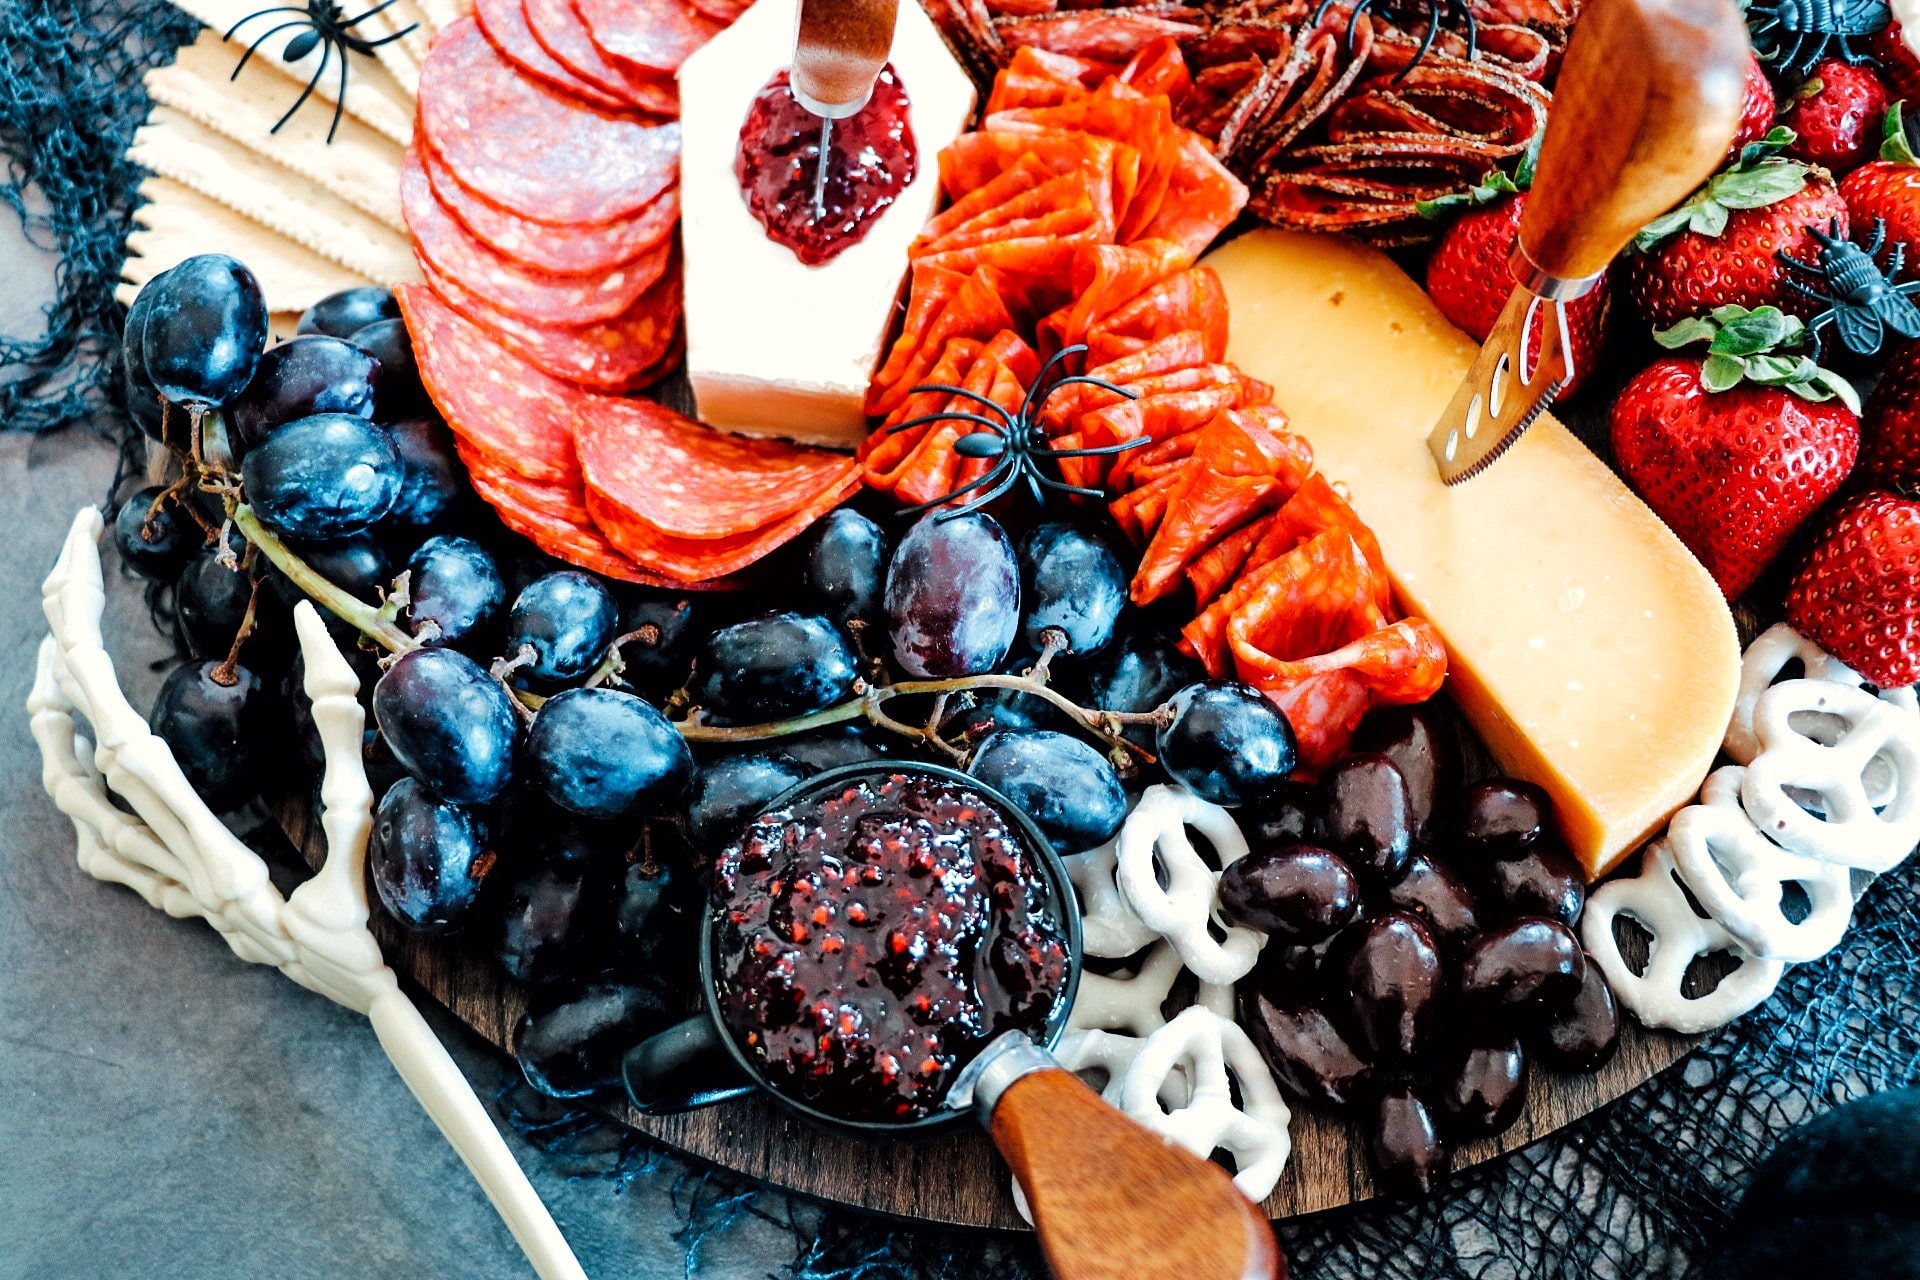 Halloween charcuterie boards: how to make a festive Halloween charcuterie tray